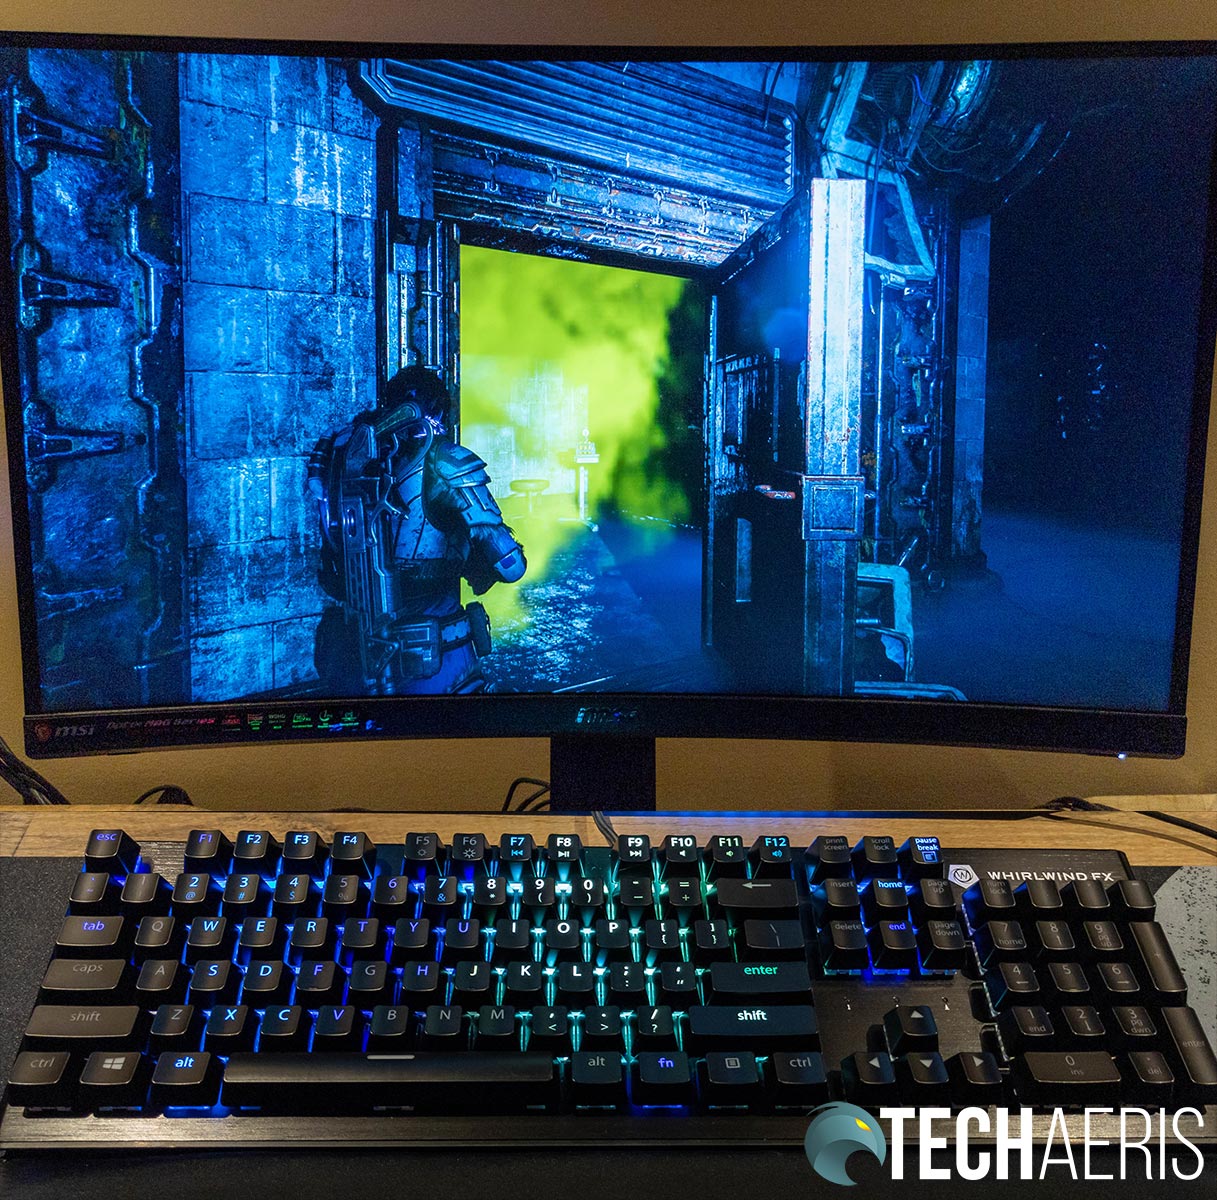 The reactive keyboard mirroring the screen while playing Gears 5 with the Whirlwind FX Element mechanical gaming keyboard